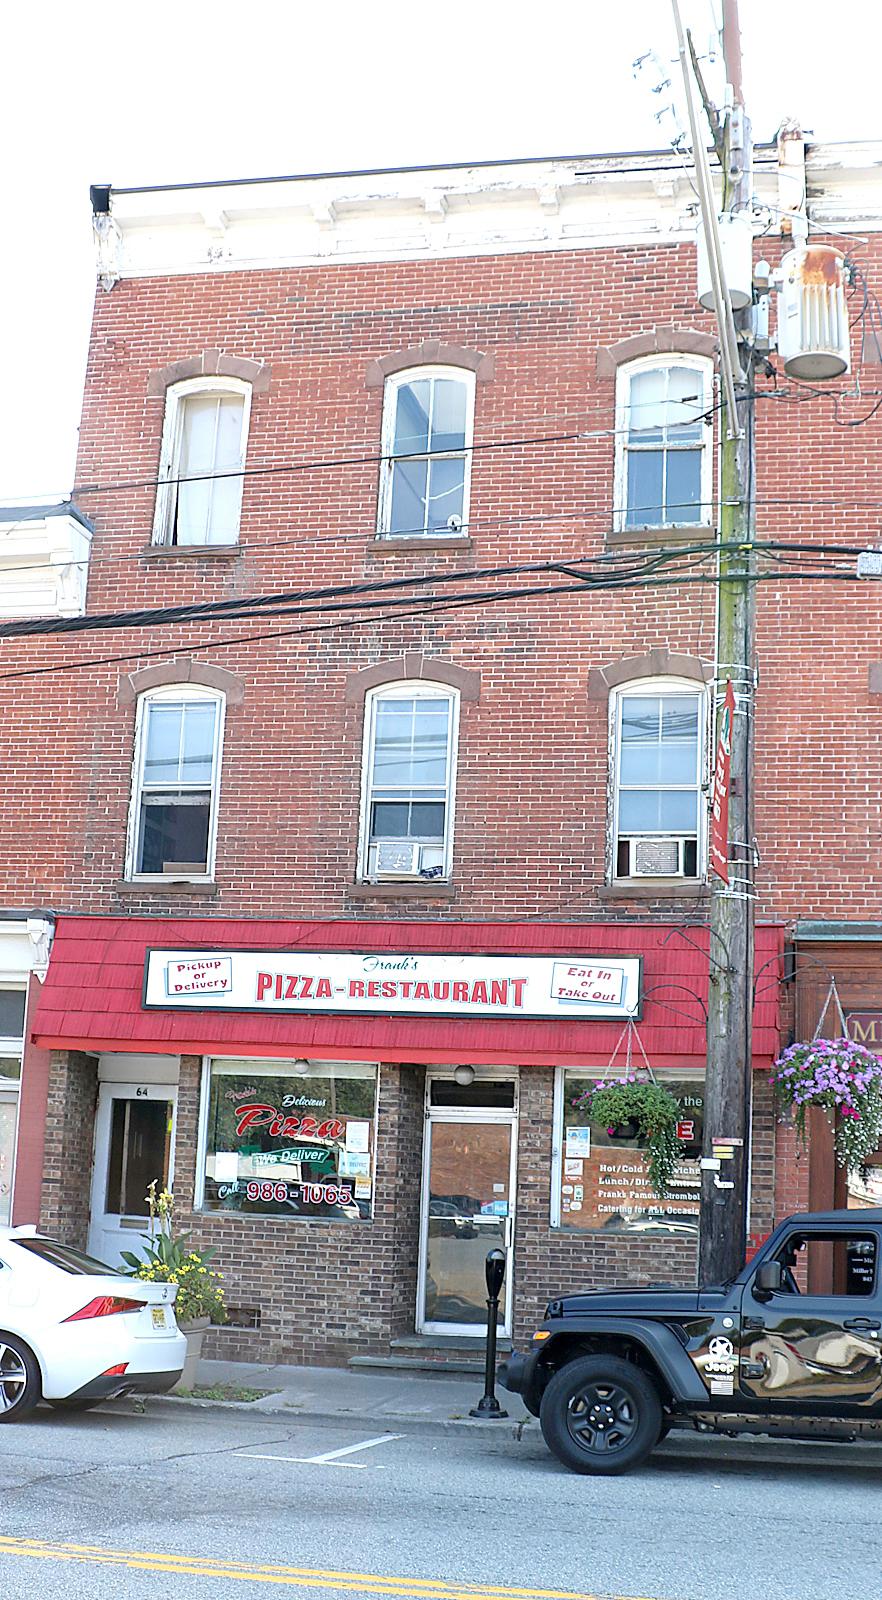 In 1907 the company established a permanent location on the second floor of the Finch building, 64 Main St., currently home to Frank’s Pizzeria